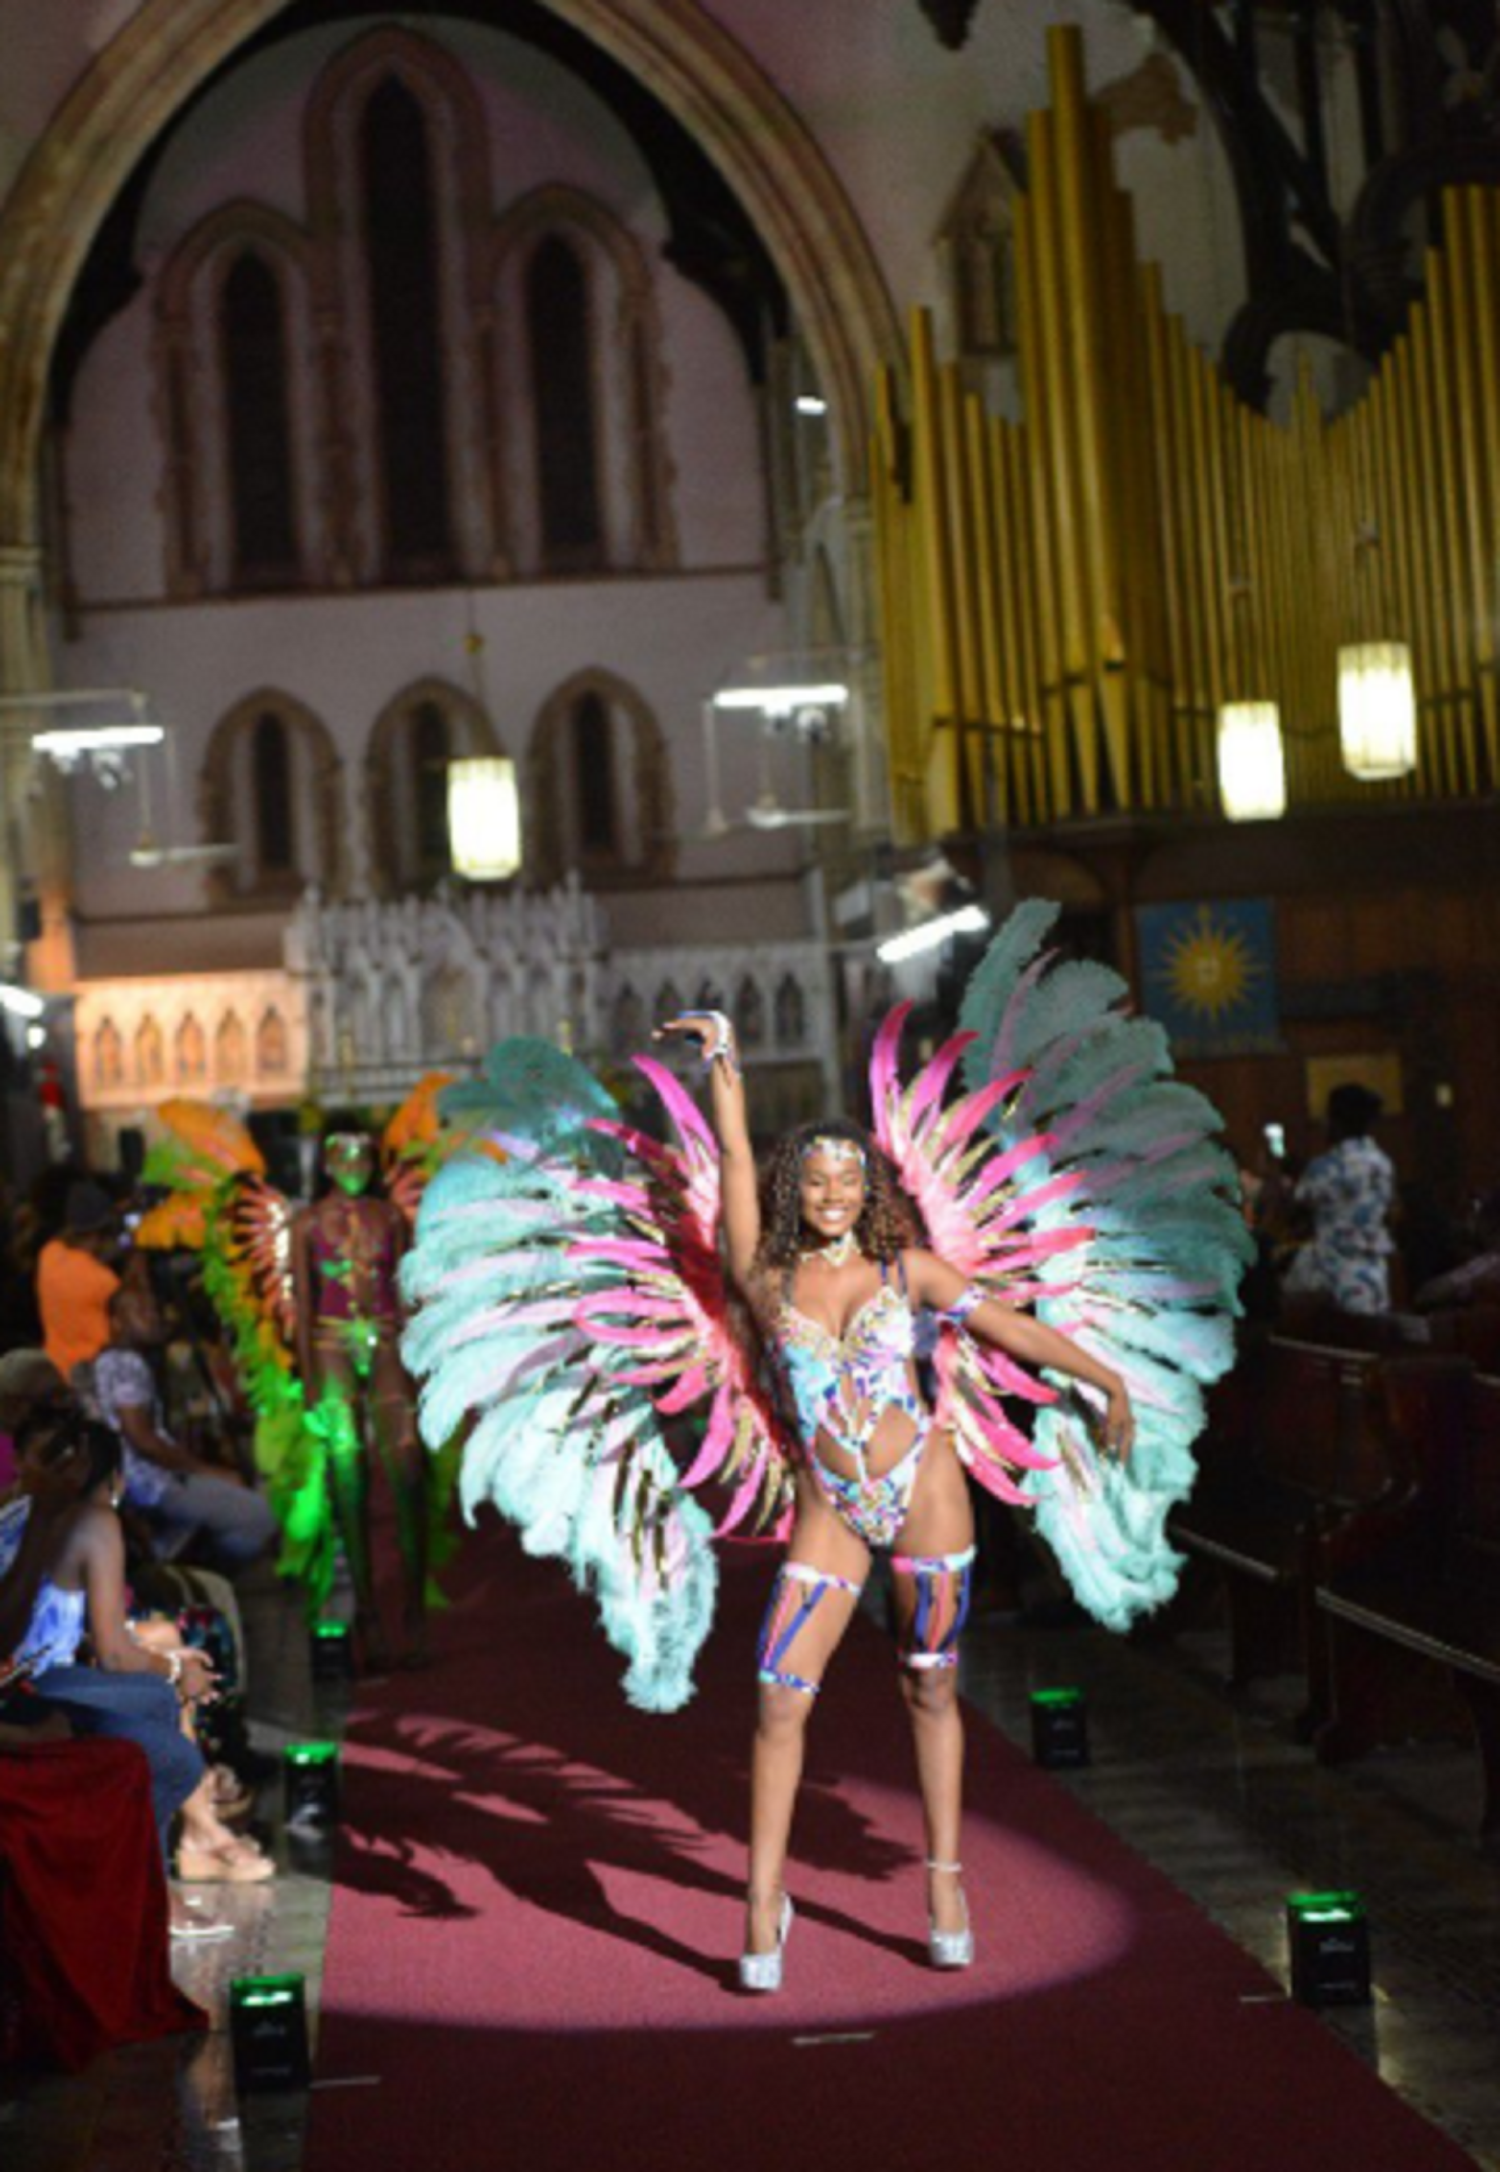 VIDEO: Models appear in swimsuits during fashion show in church